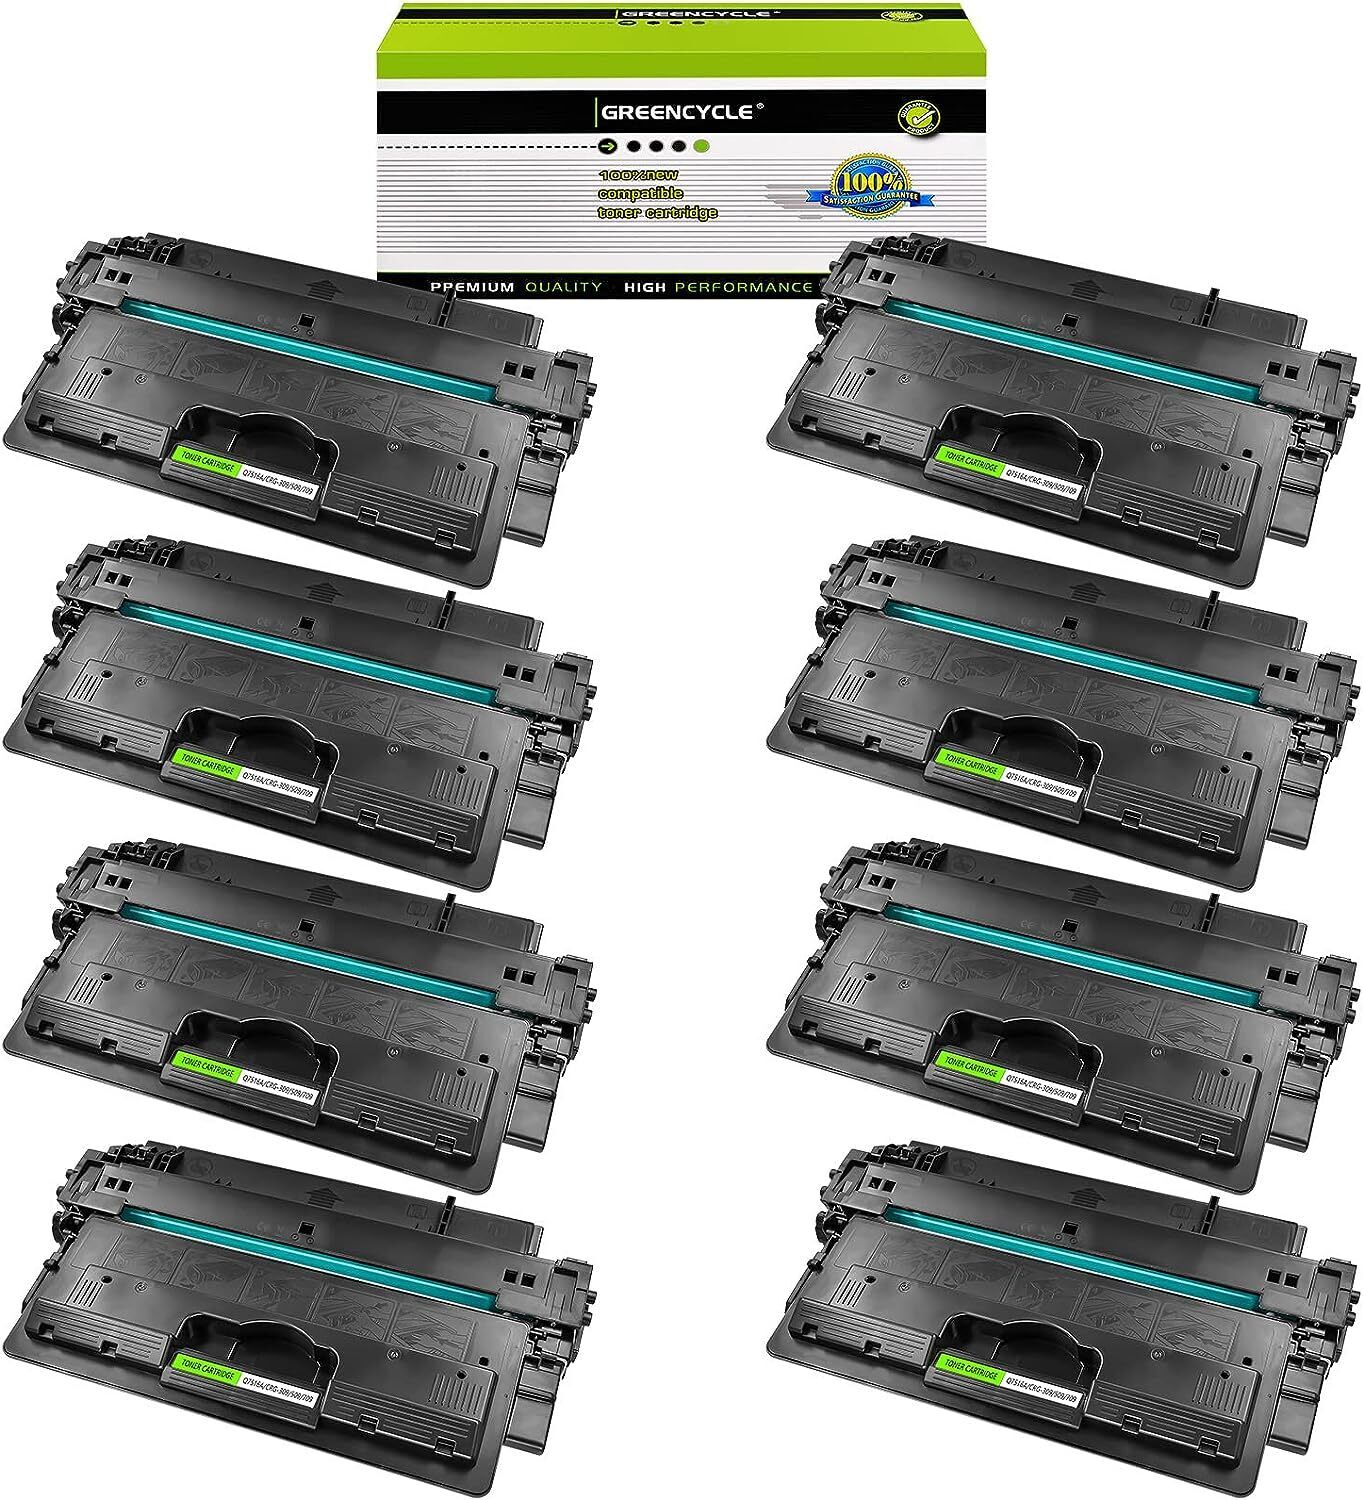 8PK Greencycle High Yield Toner 16A Q7516A Compatible for HP LaserJet 5200TN